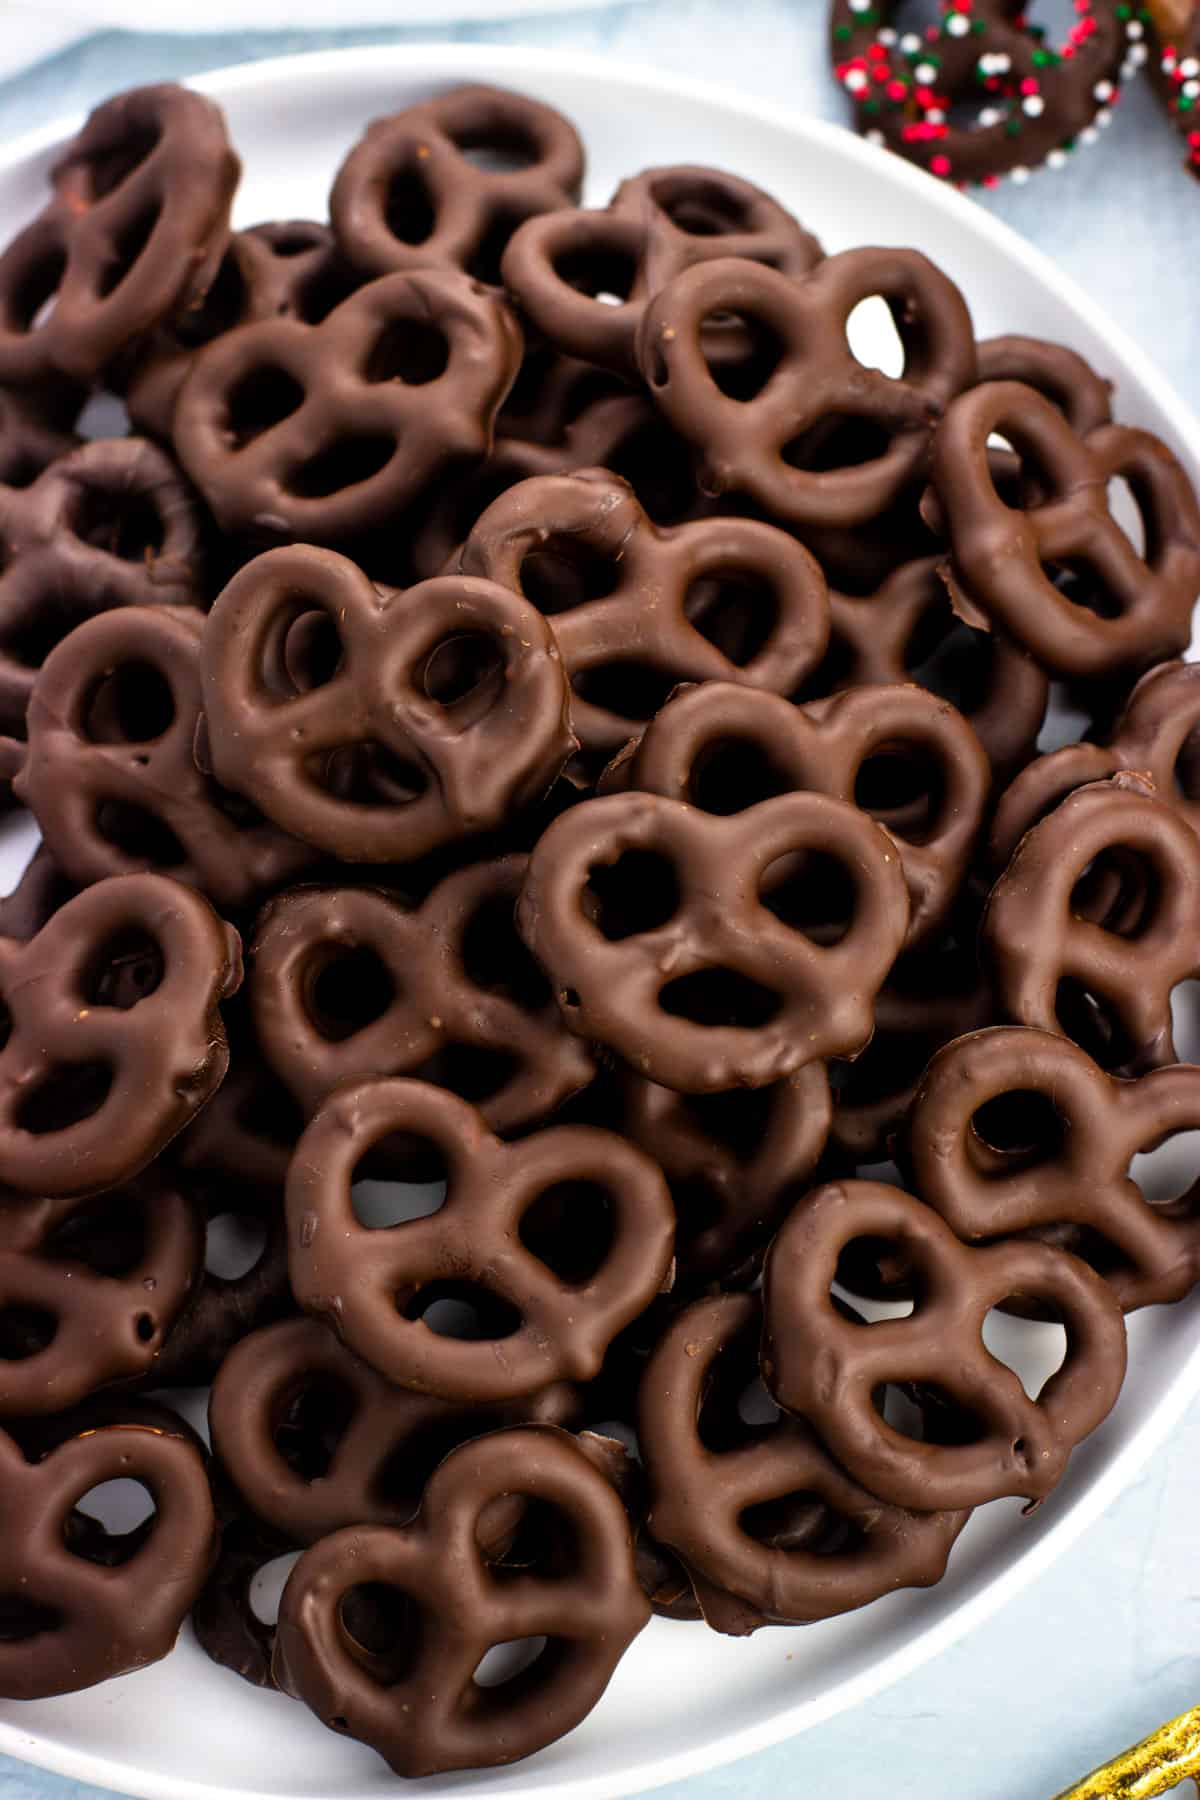 A plate filled with peppermint chocolate covered pretzels.